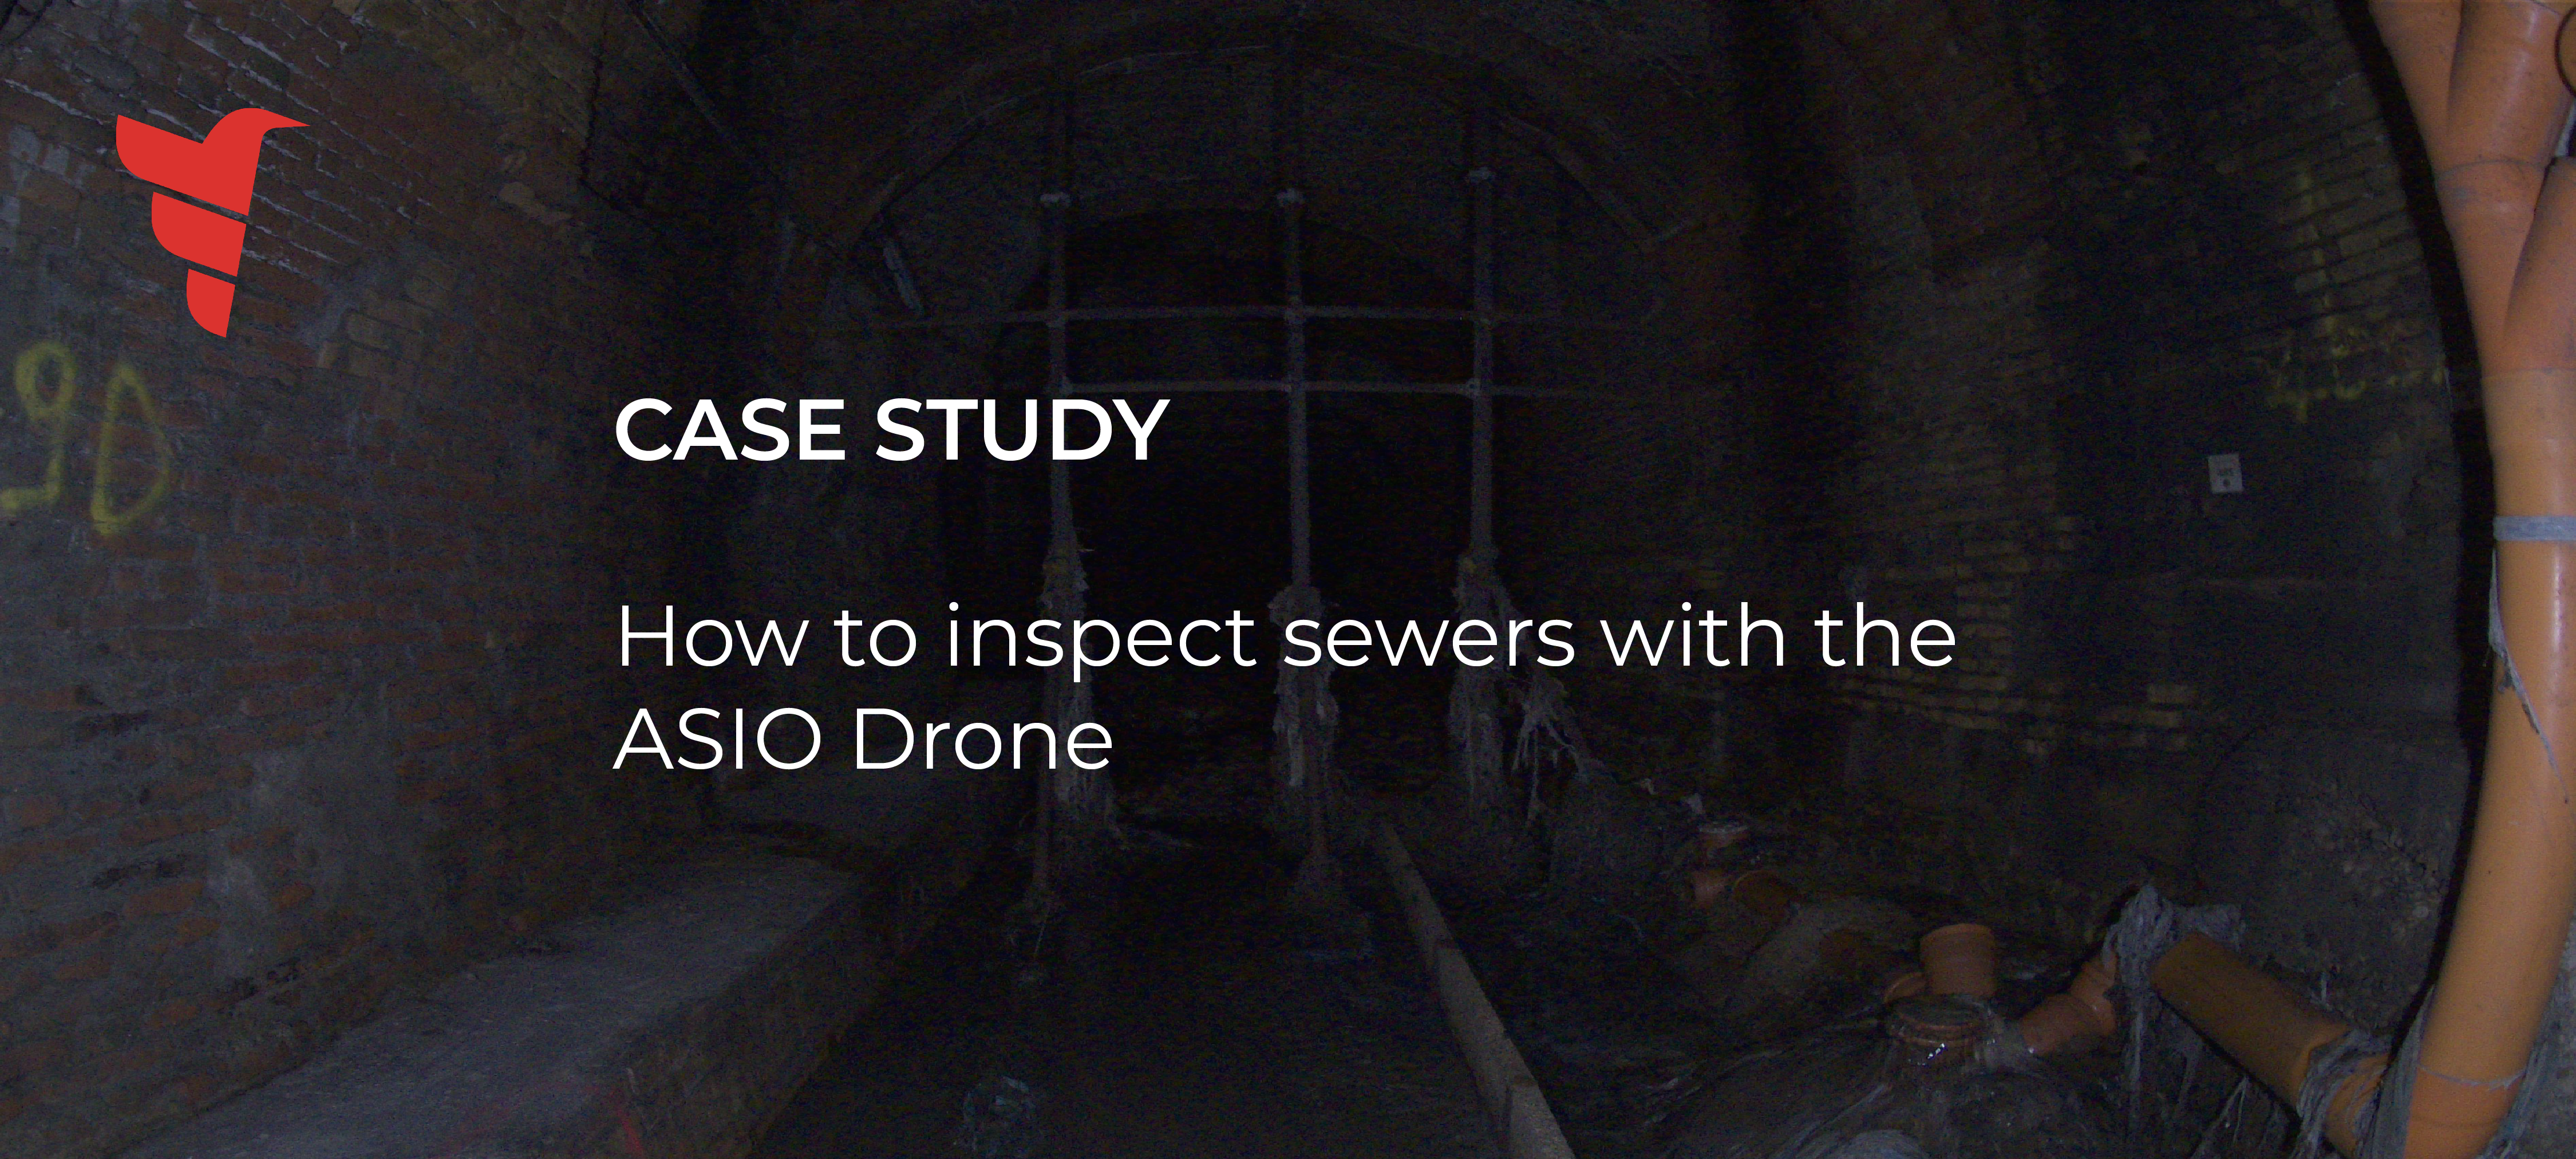 How to inspect sewers with the ASIO Drone